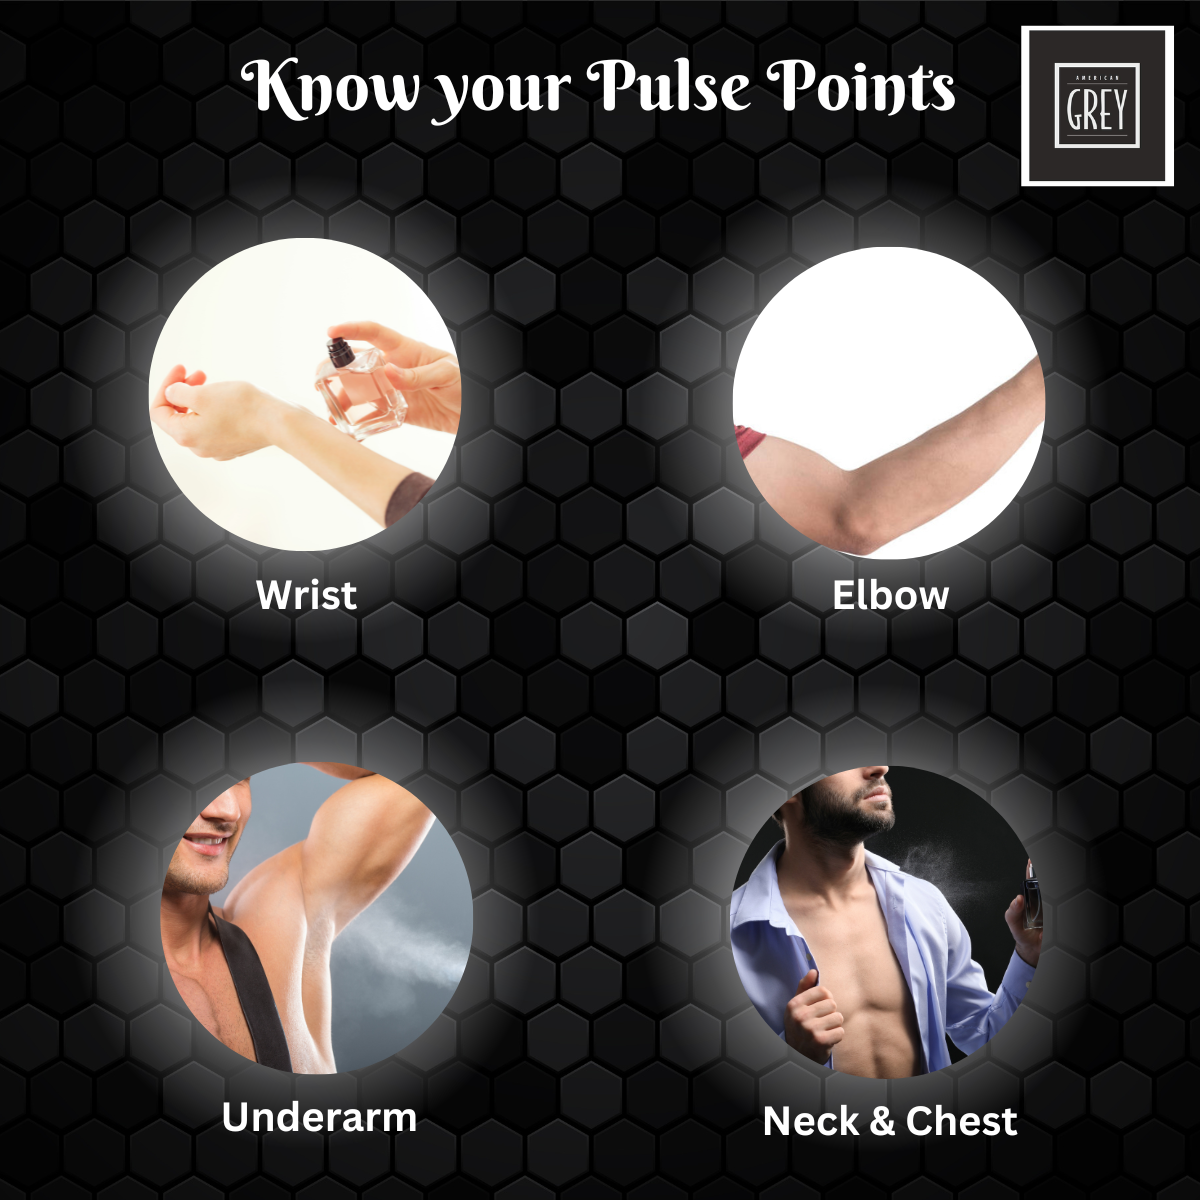 know your pulse points, pulse points, american grey mount cool perfume, perfume spray, what are the pulse points to apply deodorant for men, men deodorant, deodorant spray for men